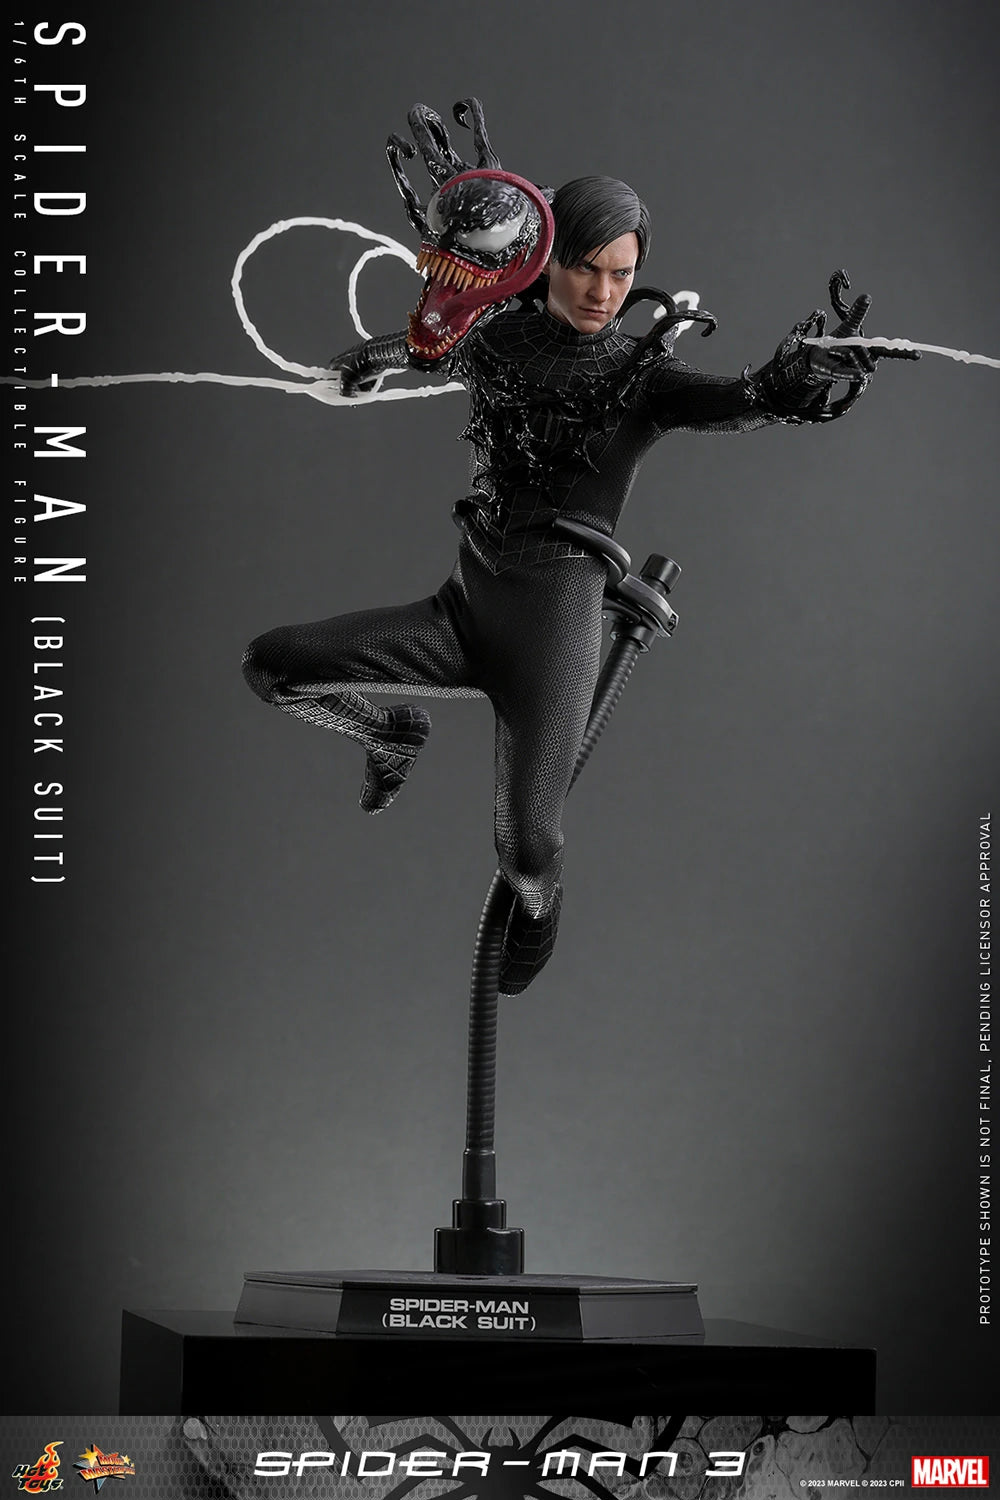 Hot Toys Spider-Man 3 Spider Man Black Suit 1/6th Scale Figure